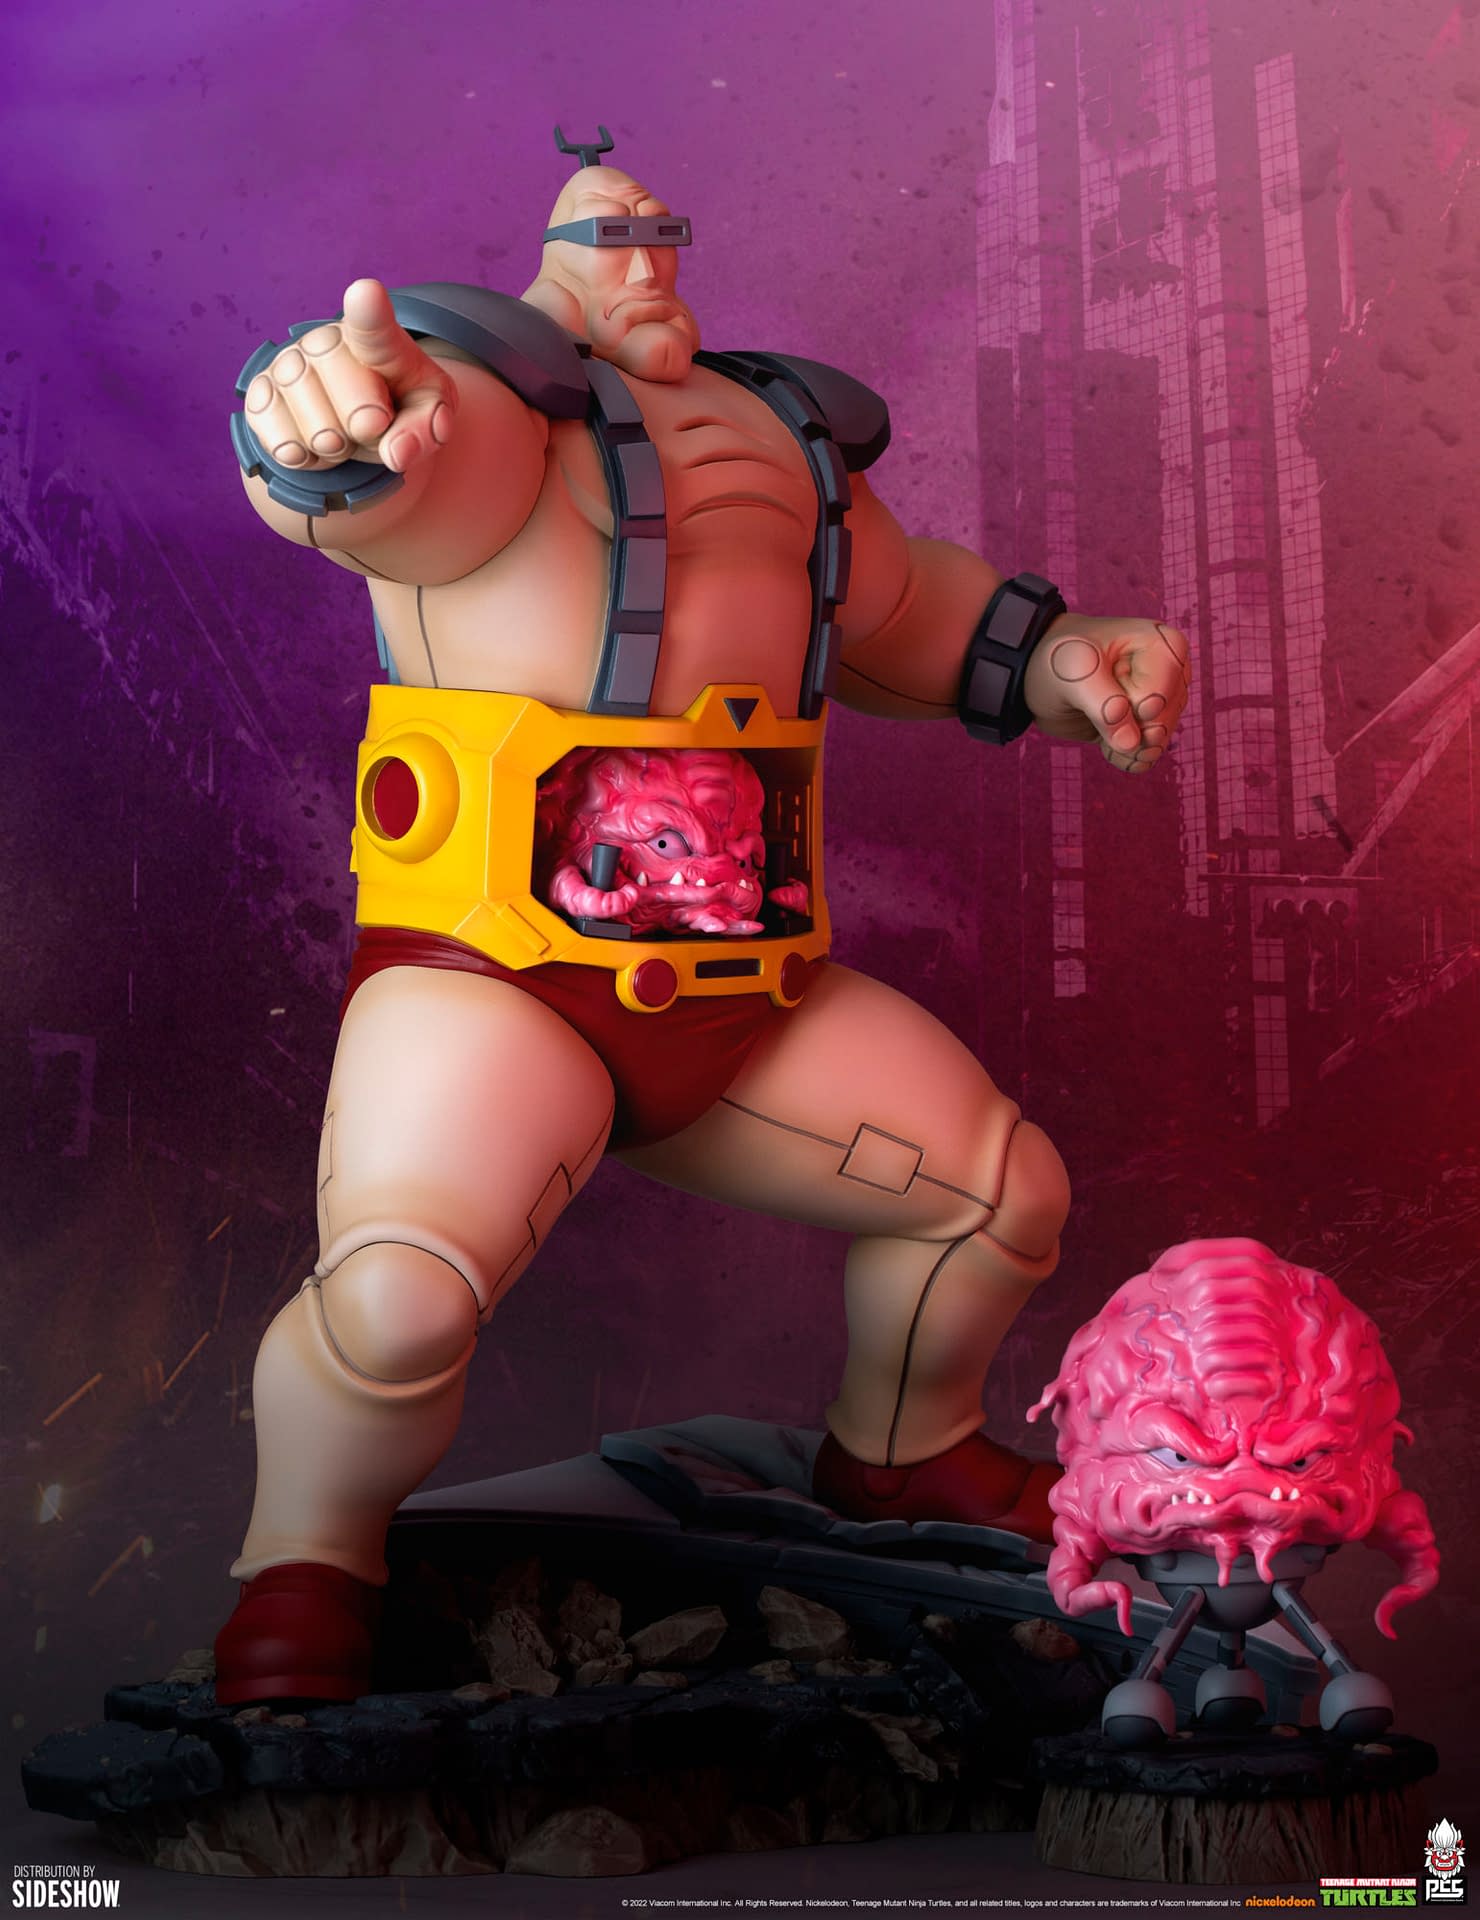 Krang Returns as Sideshow and PCS Debut Their Newest TMNT Statue